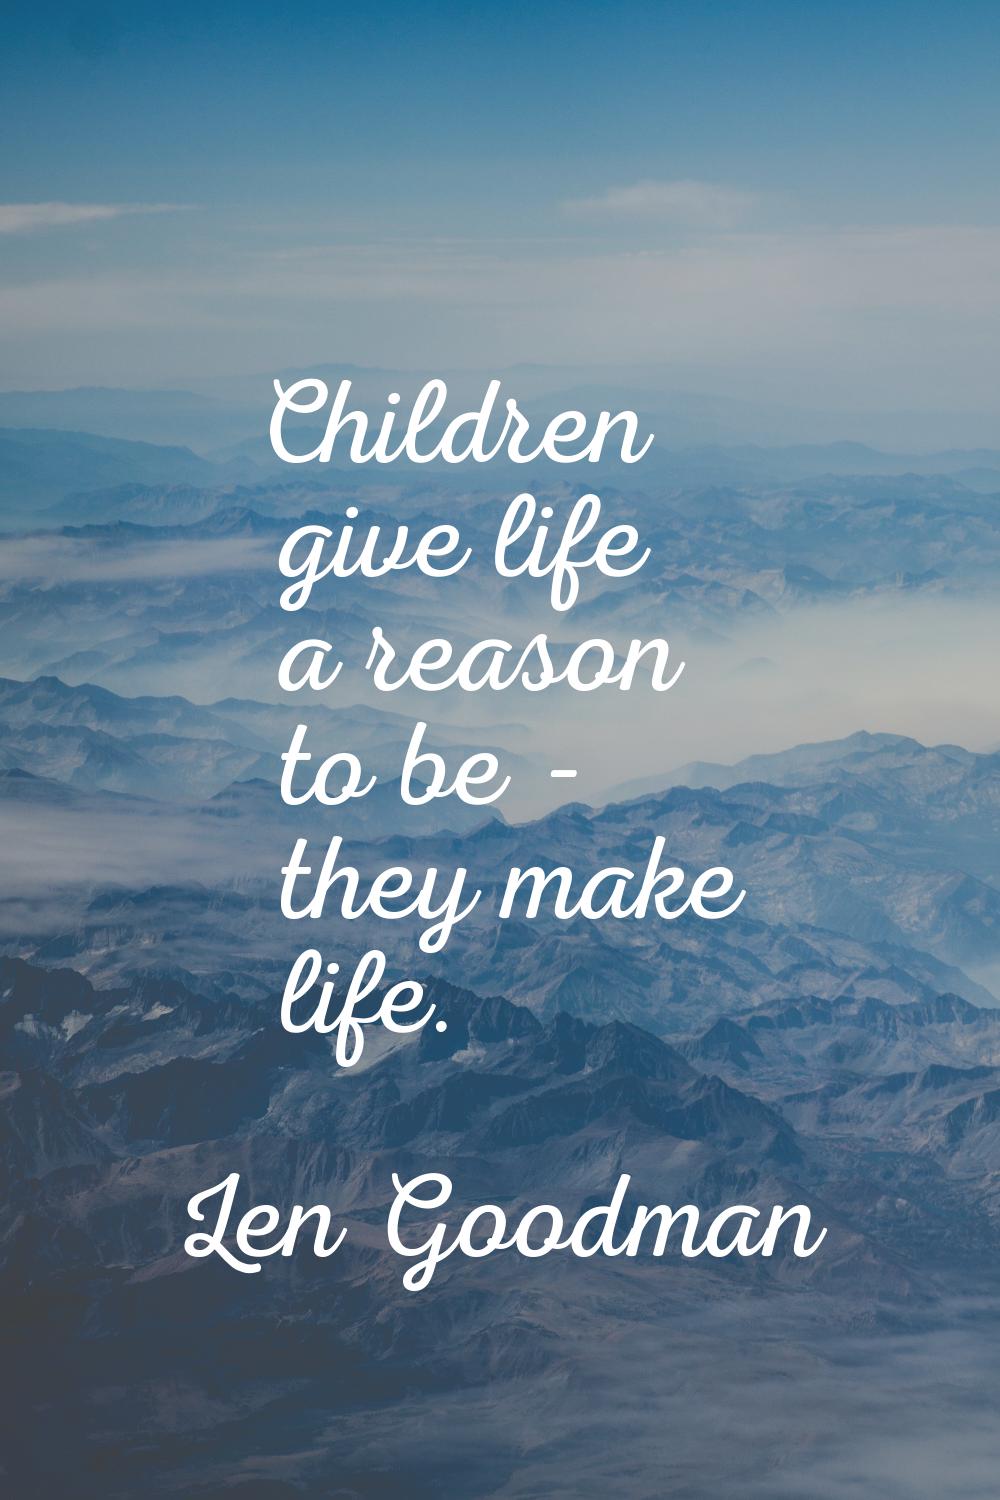 Children give life a reason to be - they make life.